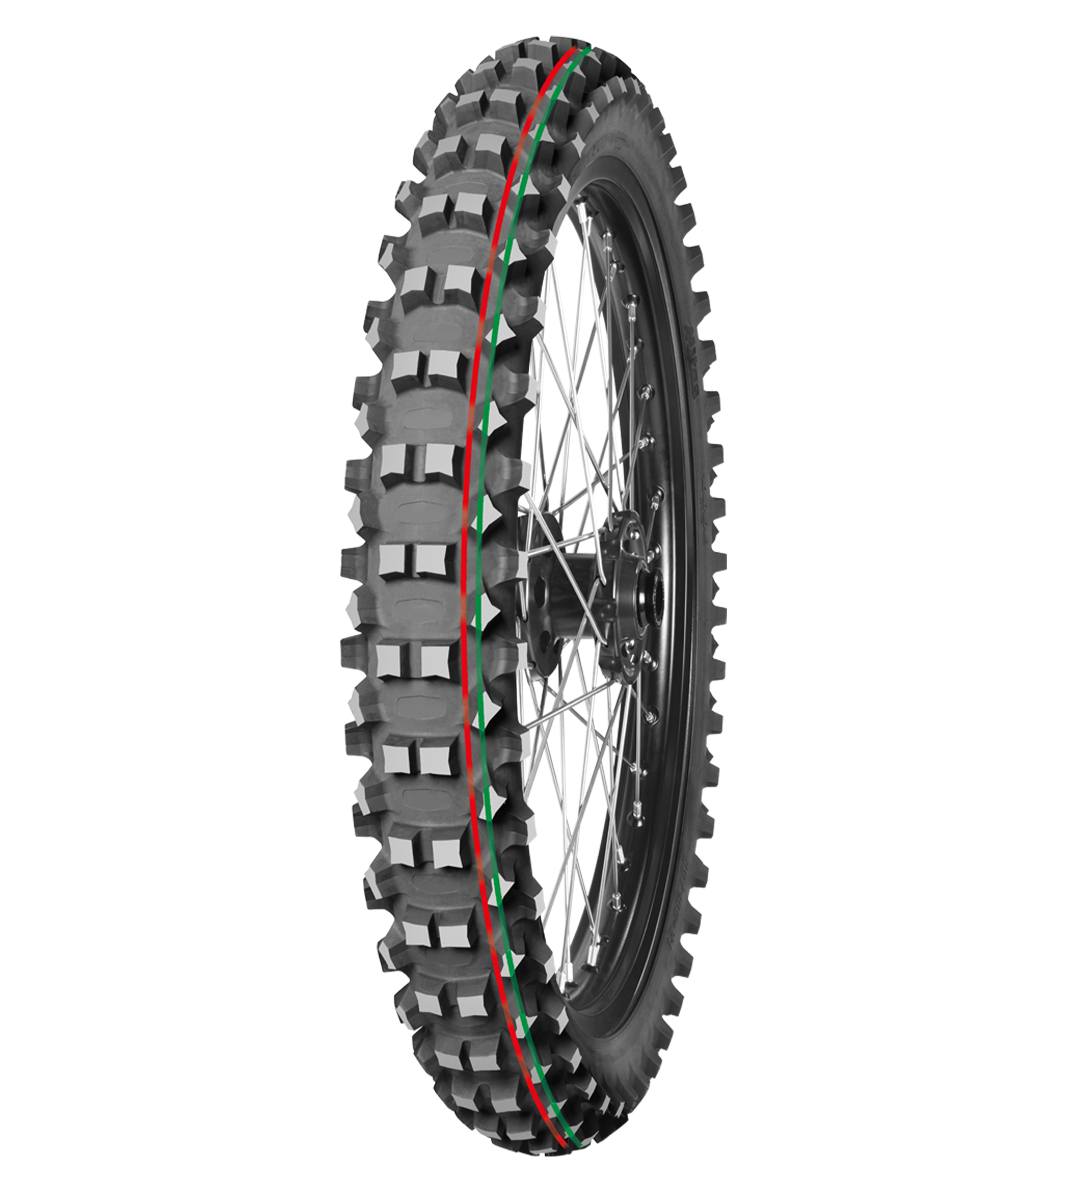 Mitas TERRA FORCE-MX MH 70/100-19 Motocross Competition Off-Road MEDIUM TO HARD 42M Red & Green Tube Front Tire, 226173, 70/100-19, Front, Motocross, Motocross Competition, Off-Road, Terra Force, Terra Force-MX MH, Trail, Tires - Imported and distributed in North & South America by Lindeco Genuine Powersports - Premier Powersports Equipment and Accessories for Motorcycle Enthusiasts, Professional Riders and Dealers.